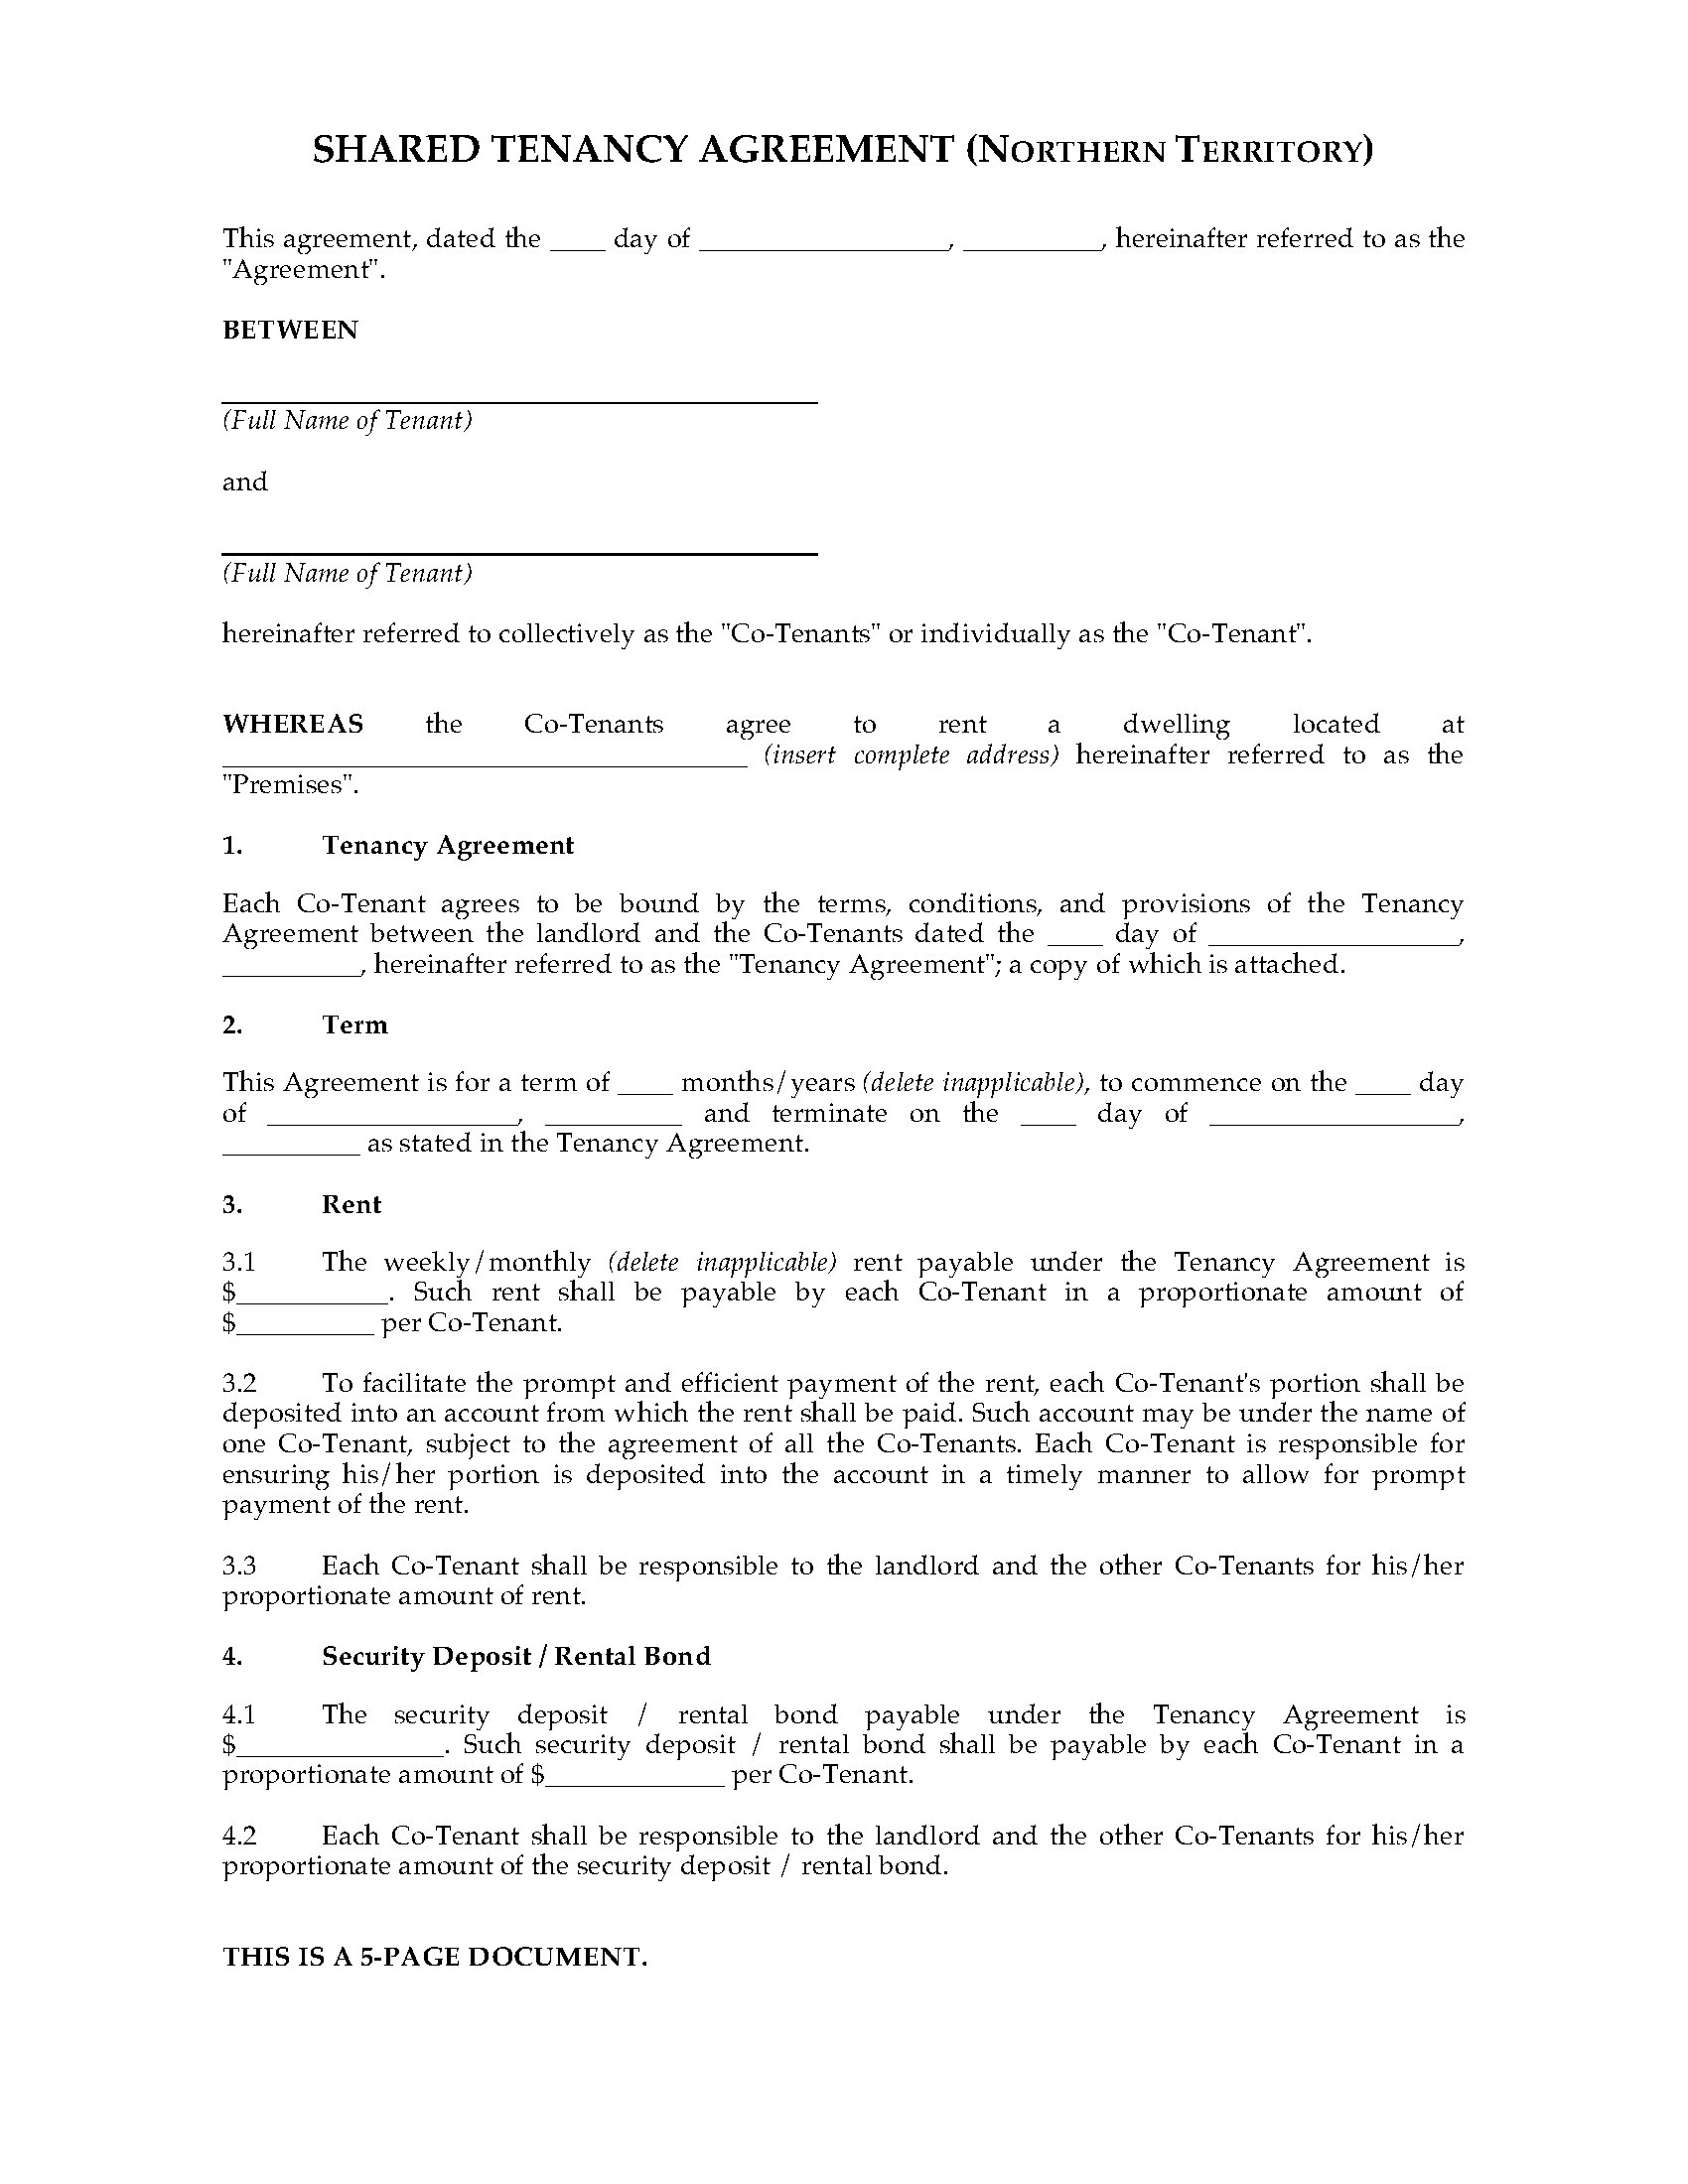 assignment of council tenancy